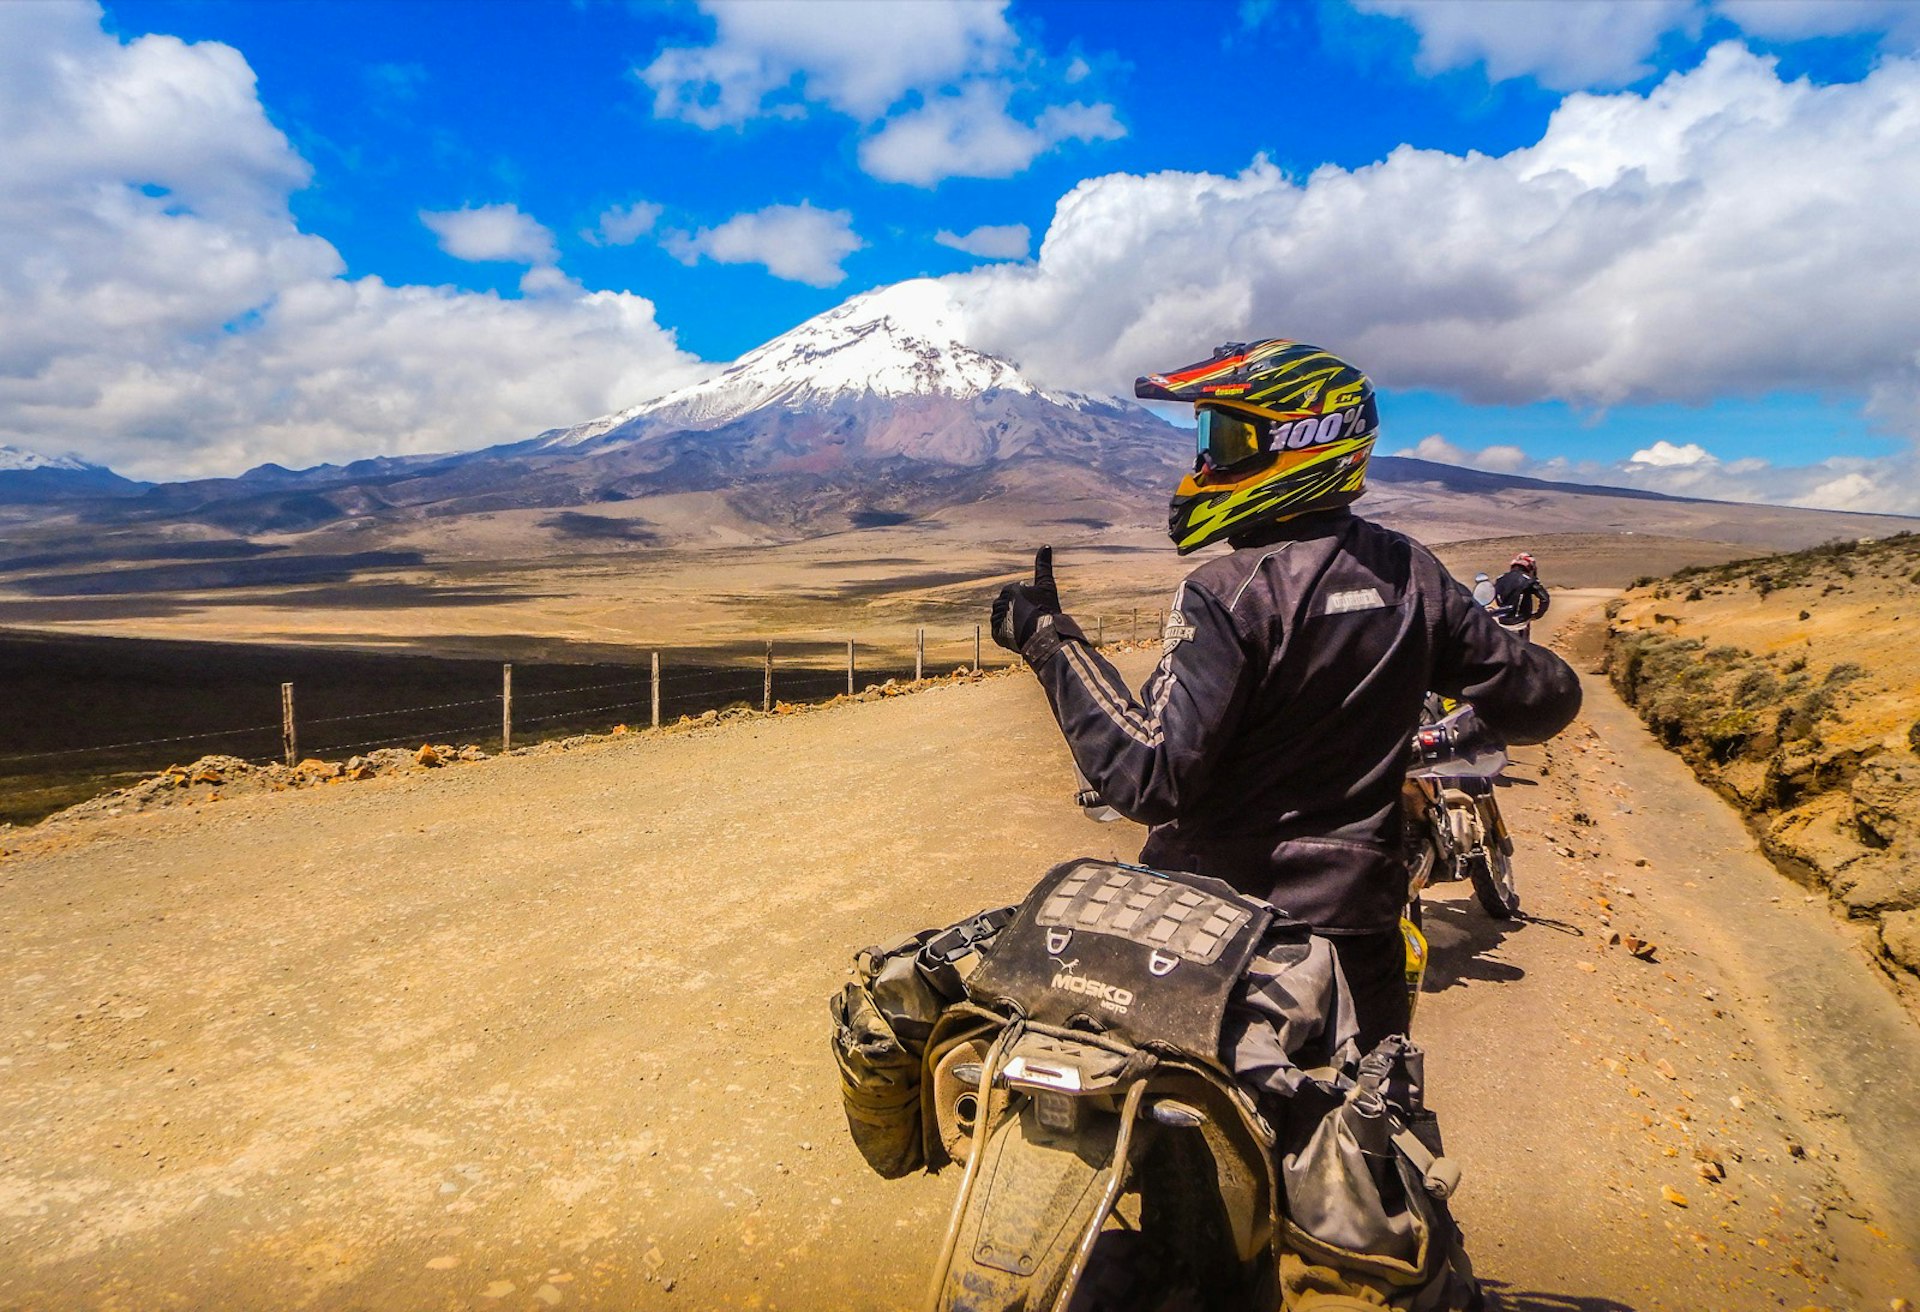 a person gives a thumbs up while on a motorcycle with a towering snow capped peak in the back ground on an epic adventure 